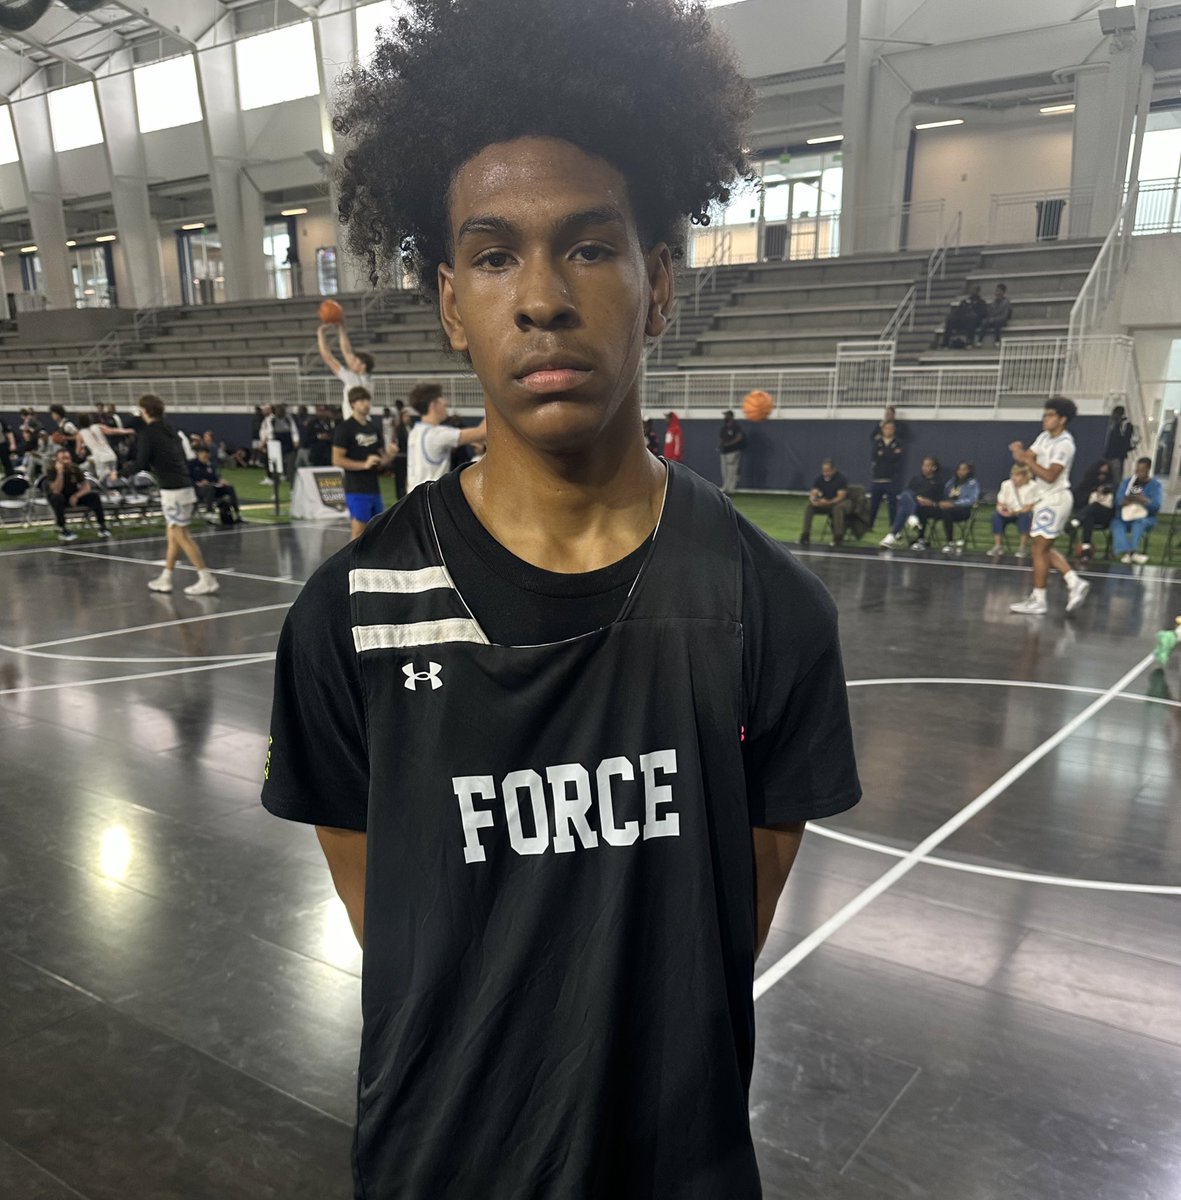 JoJo Torres of @jerseyforce_ had a great showing in the 8AM game slot, knocking down threes at a high rate and slashing to the basket. Good, protectable frame and a prospect to monitor over the next year.